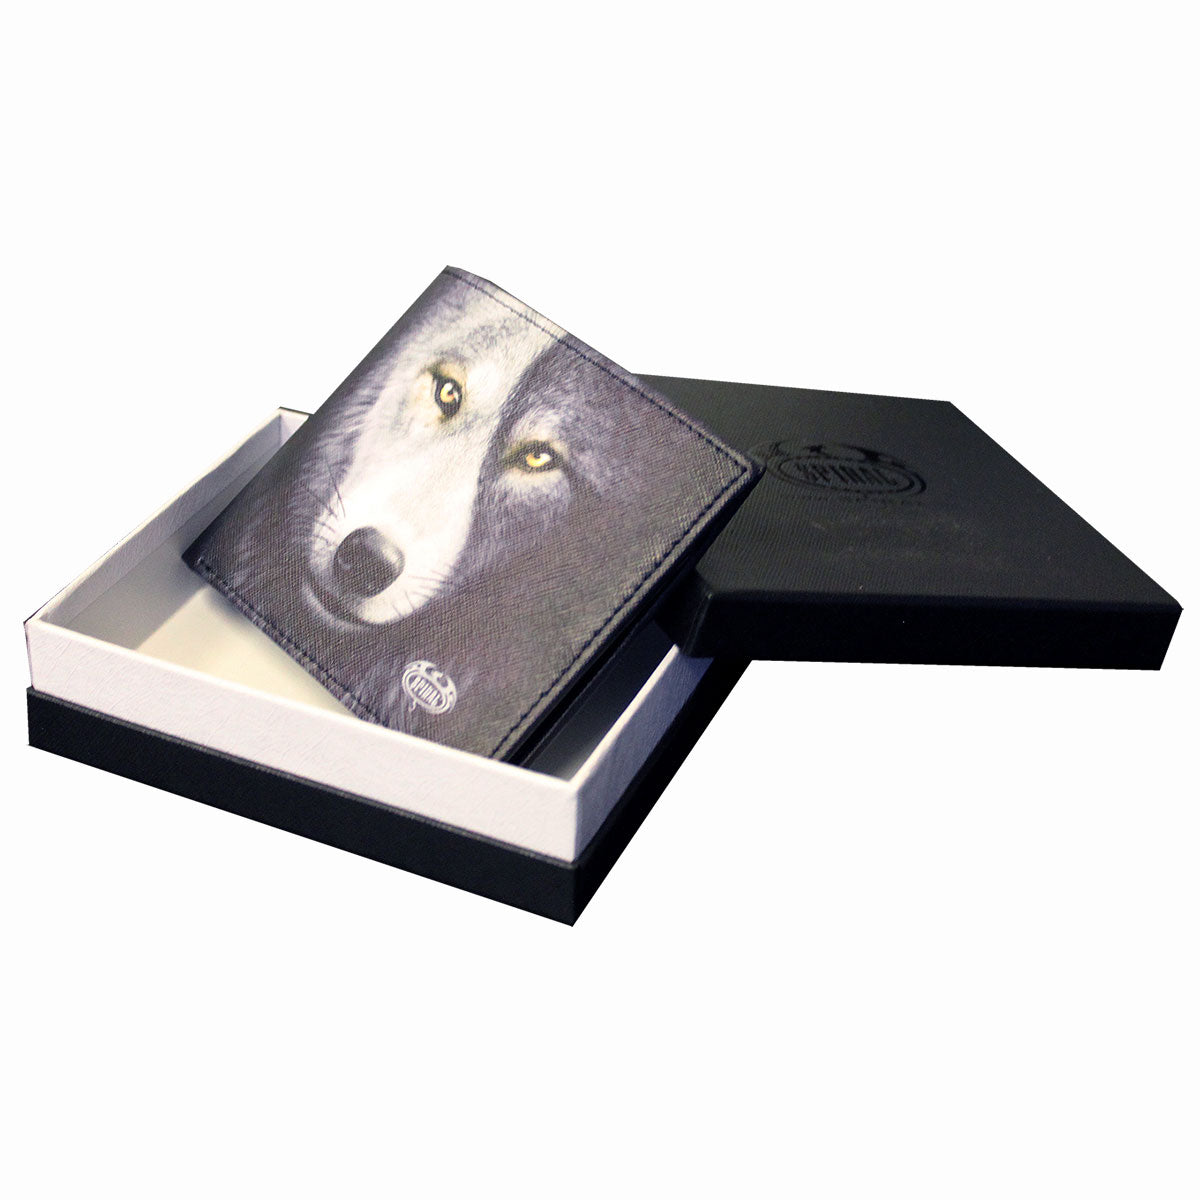 WOLF CHI - BiFold Wallet with RFID Blocking and Gift Box